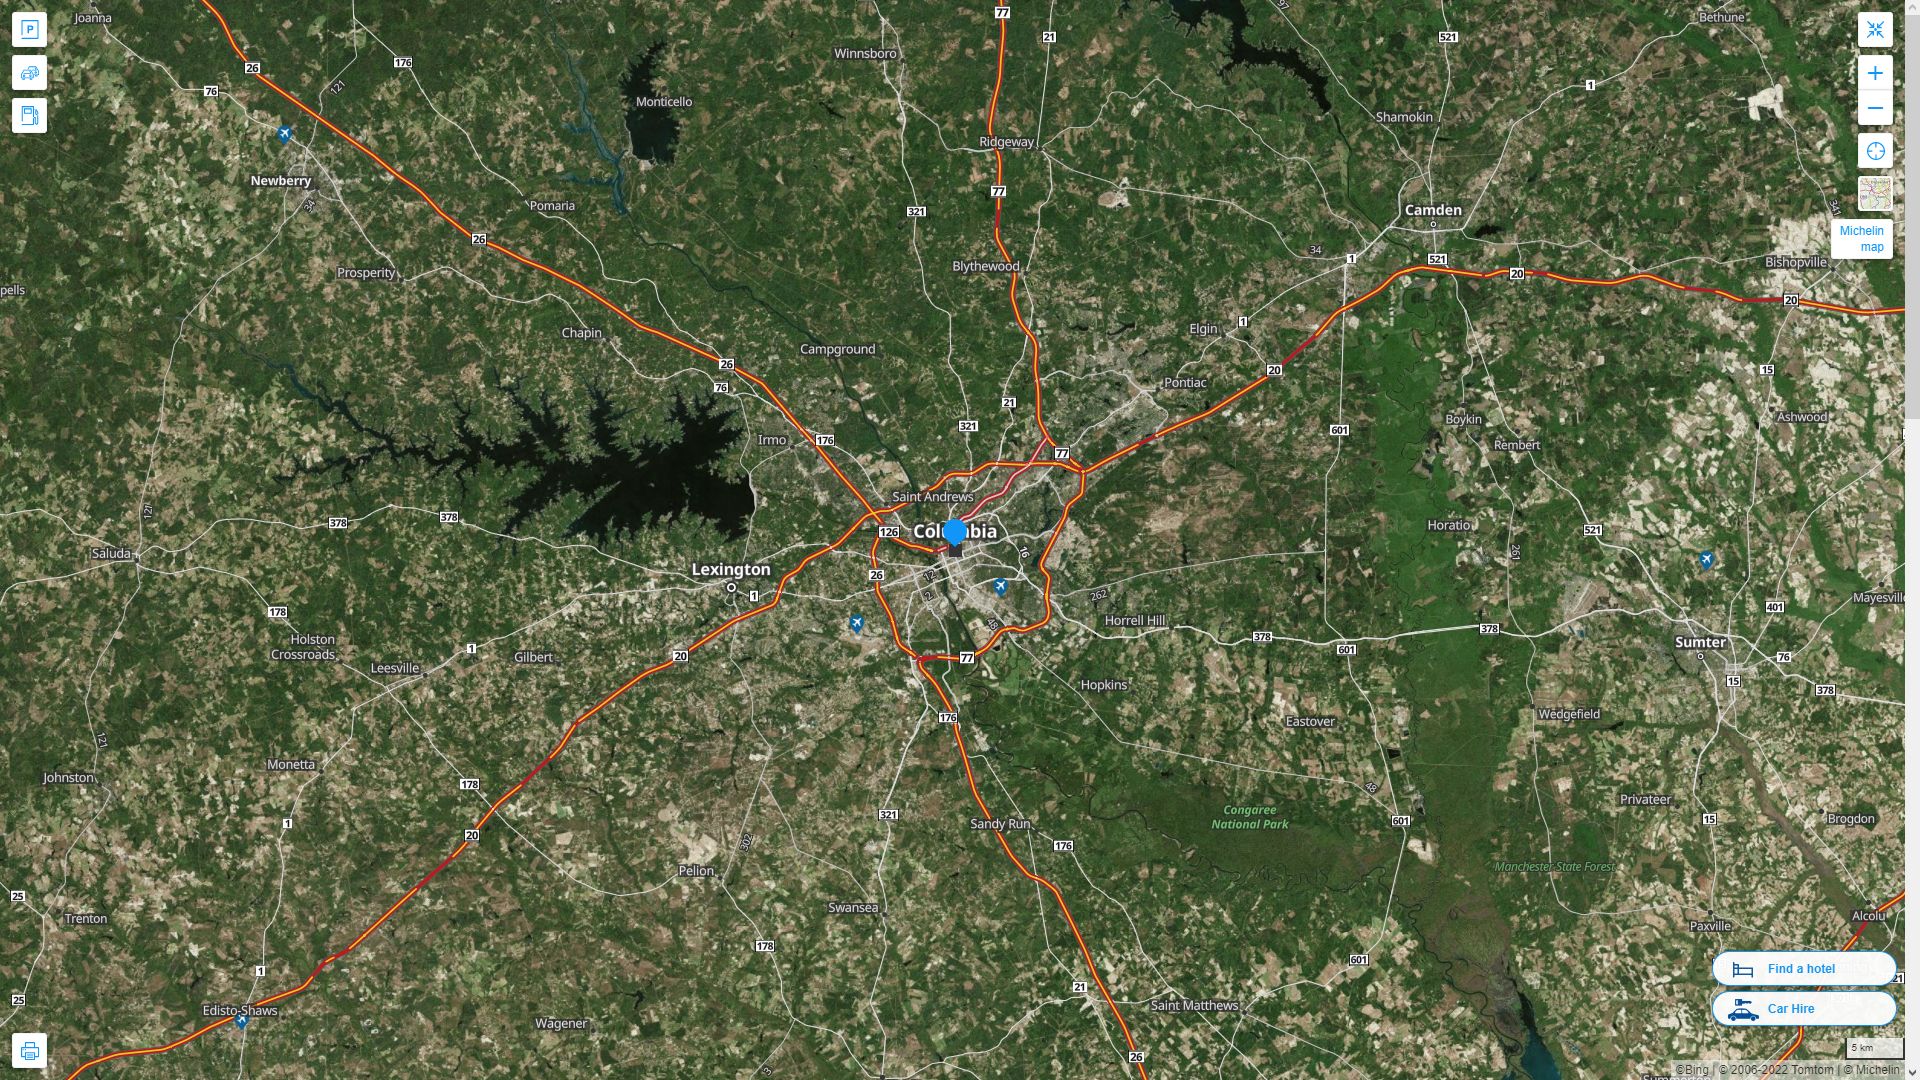 Columbia South Carolina Highway and Road Map with Satellite View